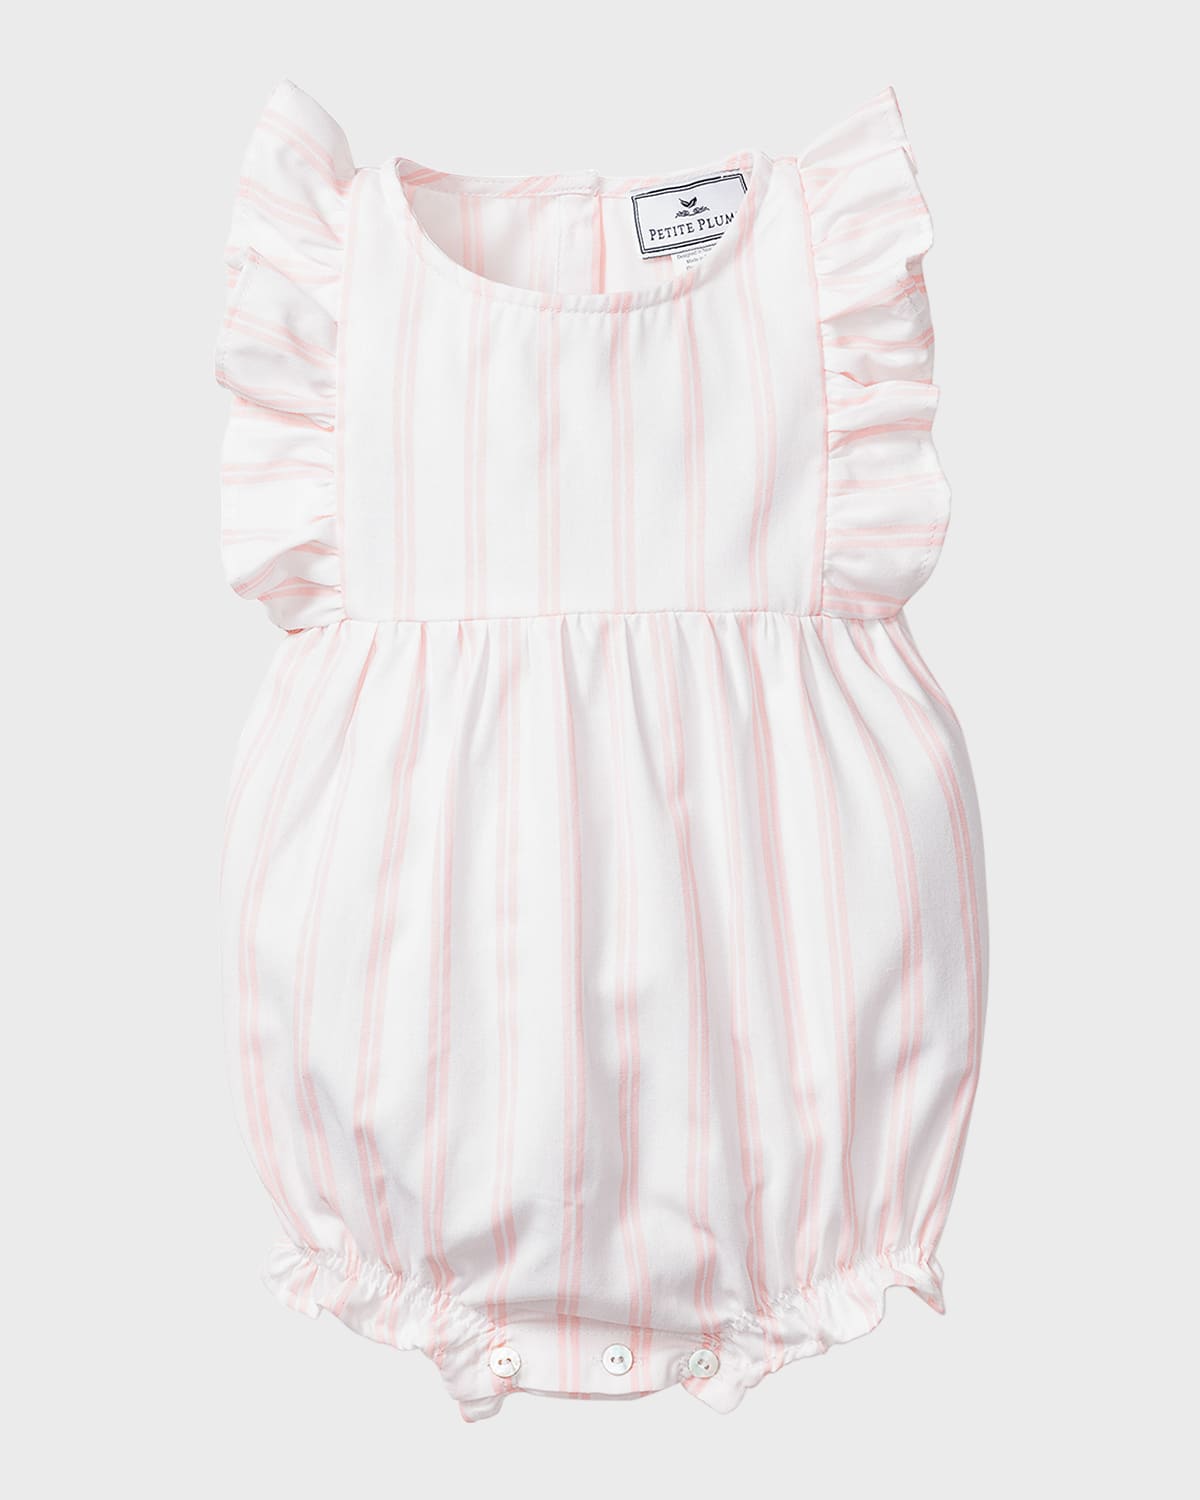 Petite Plume Babies' Kid's Printed Ruffled Bubble Romper In Pink And White St